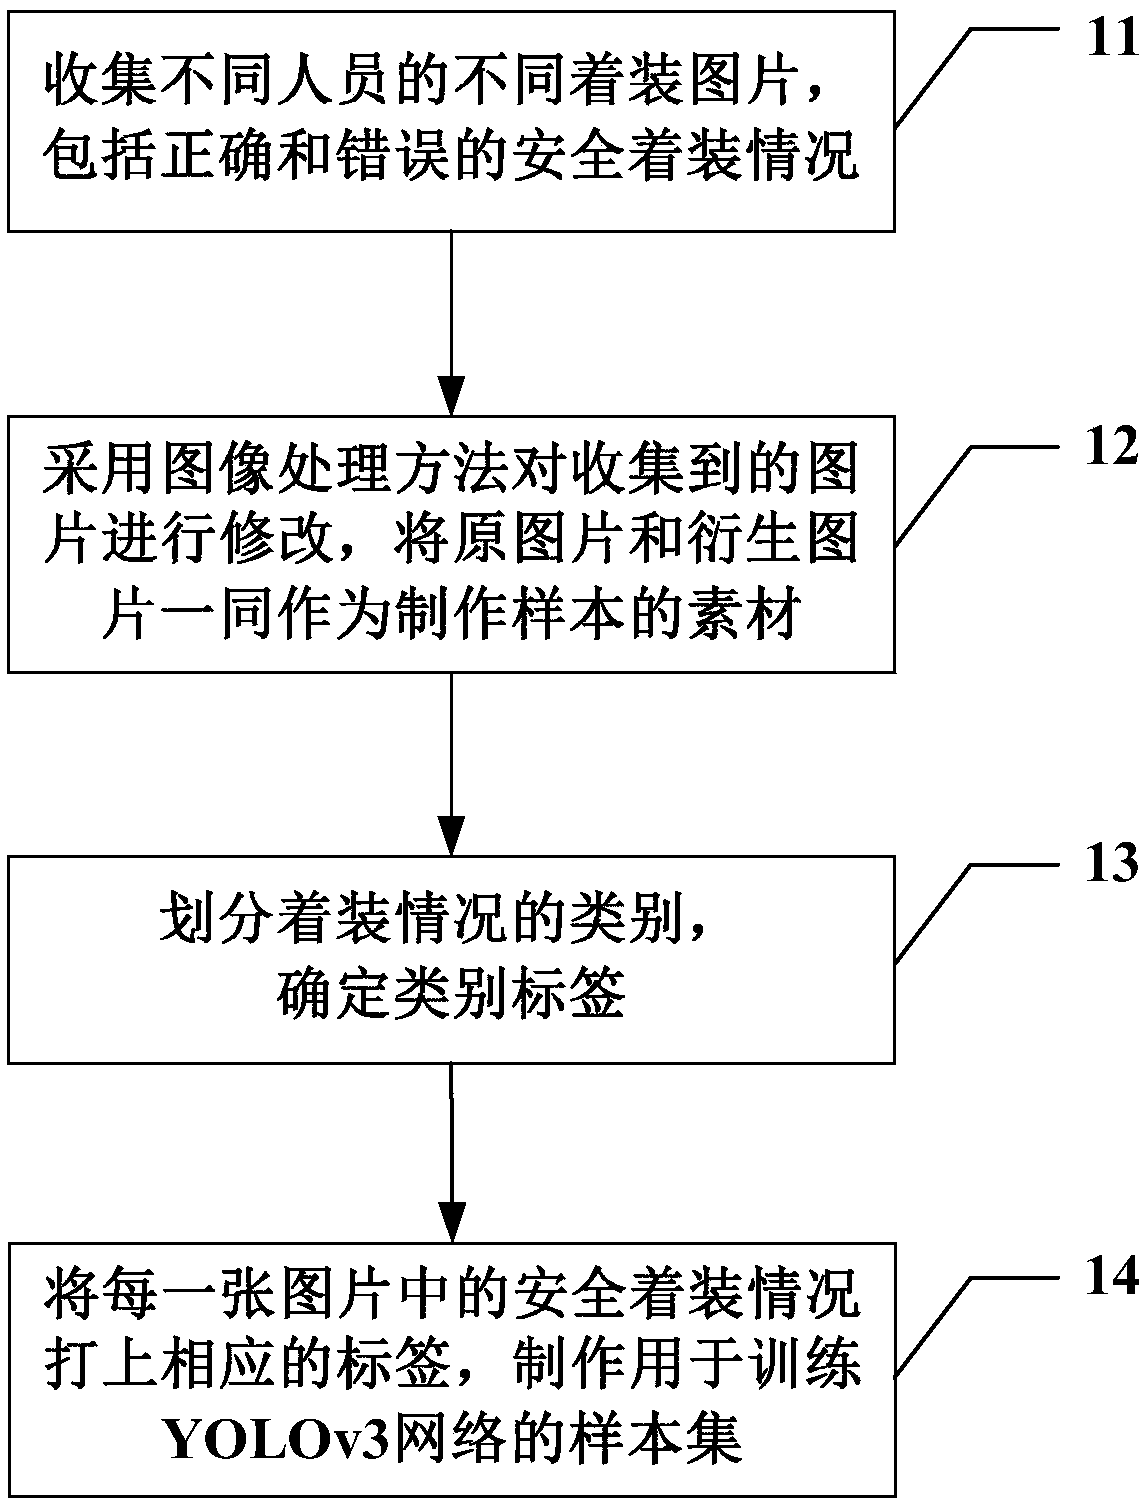 Electric power operation personnel safety dressing detection method based on YOLOv3 target detection